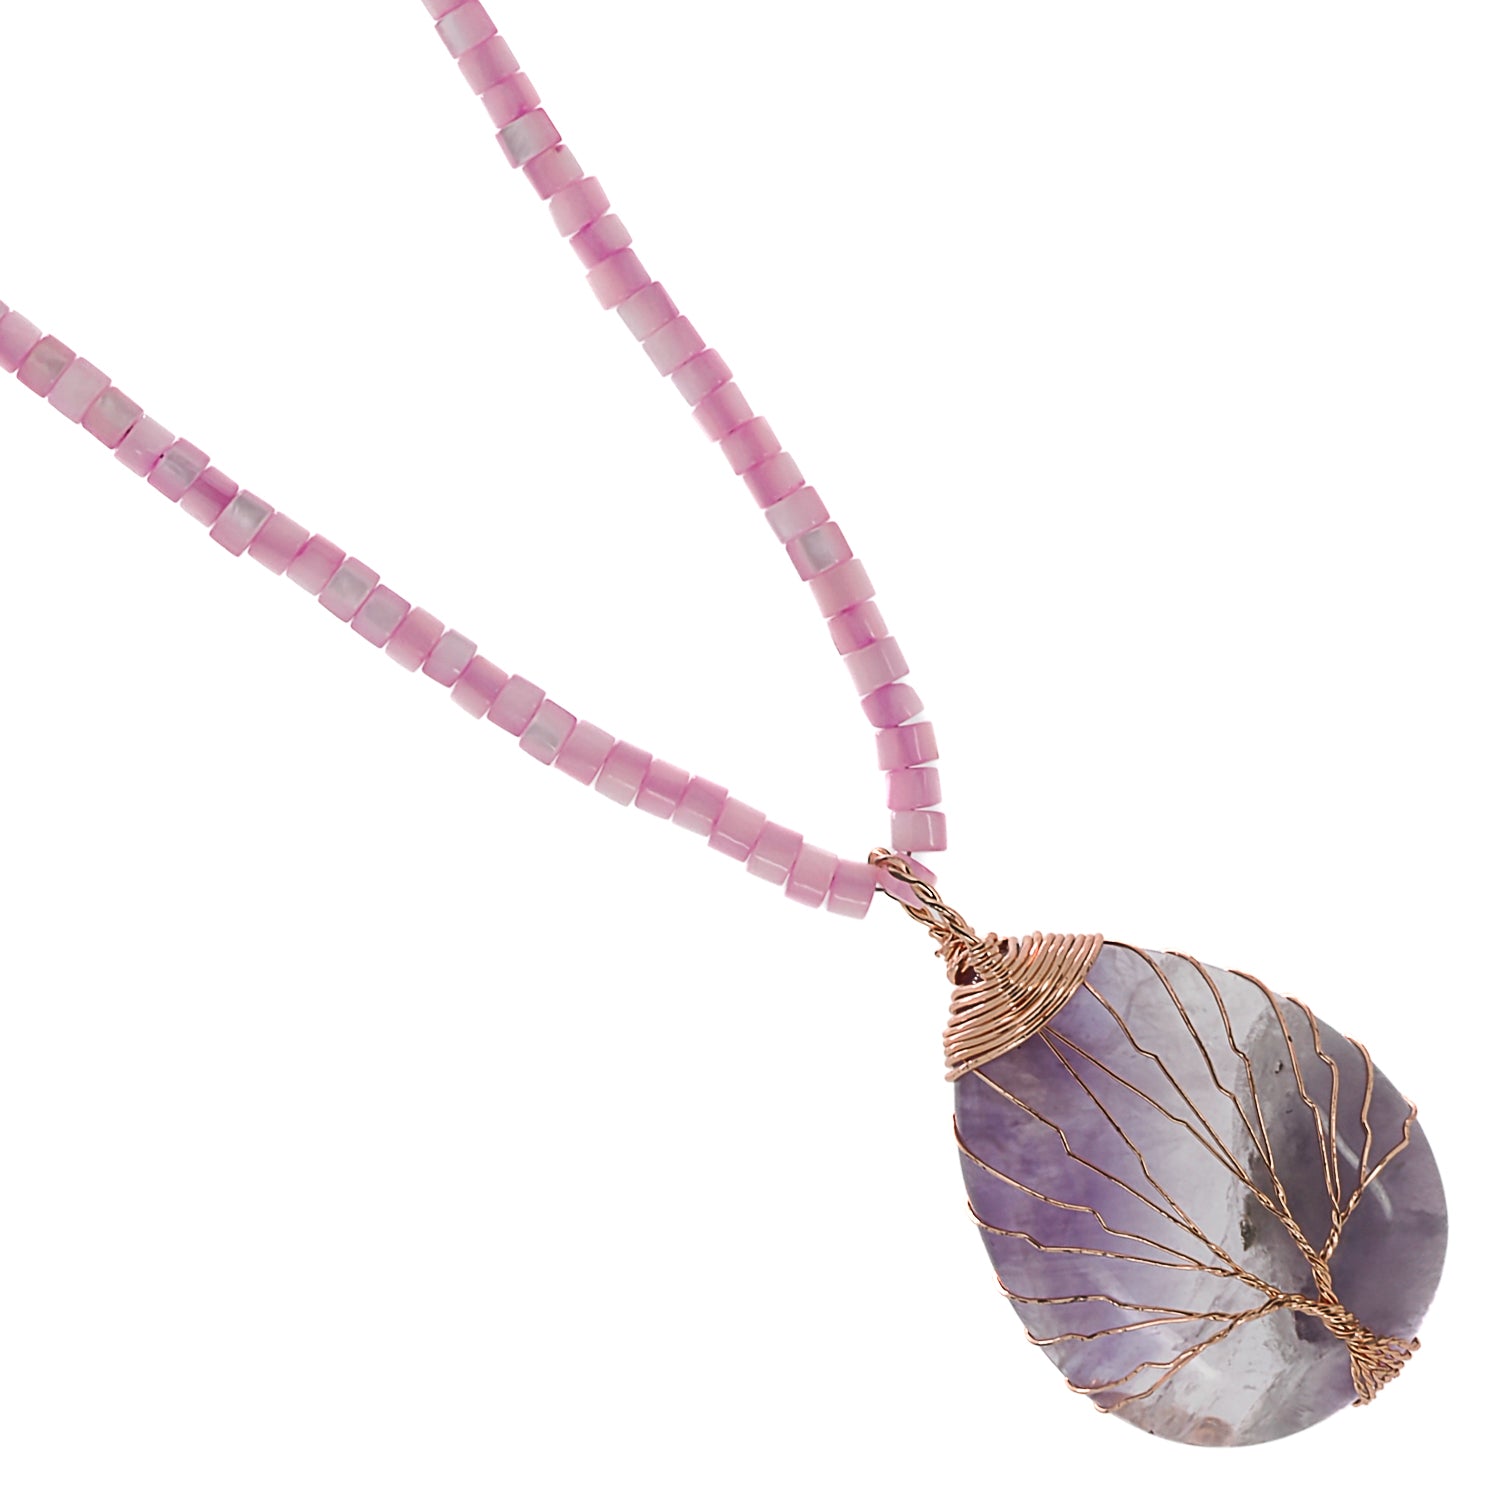 Experience the captivating allure of the Amethyst Healing Tree Necklace, combining delicate pink pearl chain with a natural amethyst tree pendant.